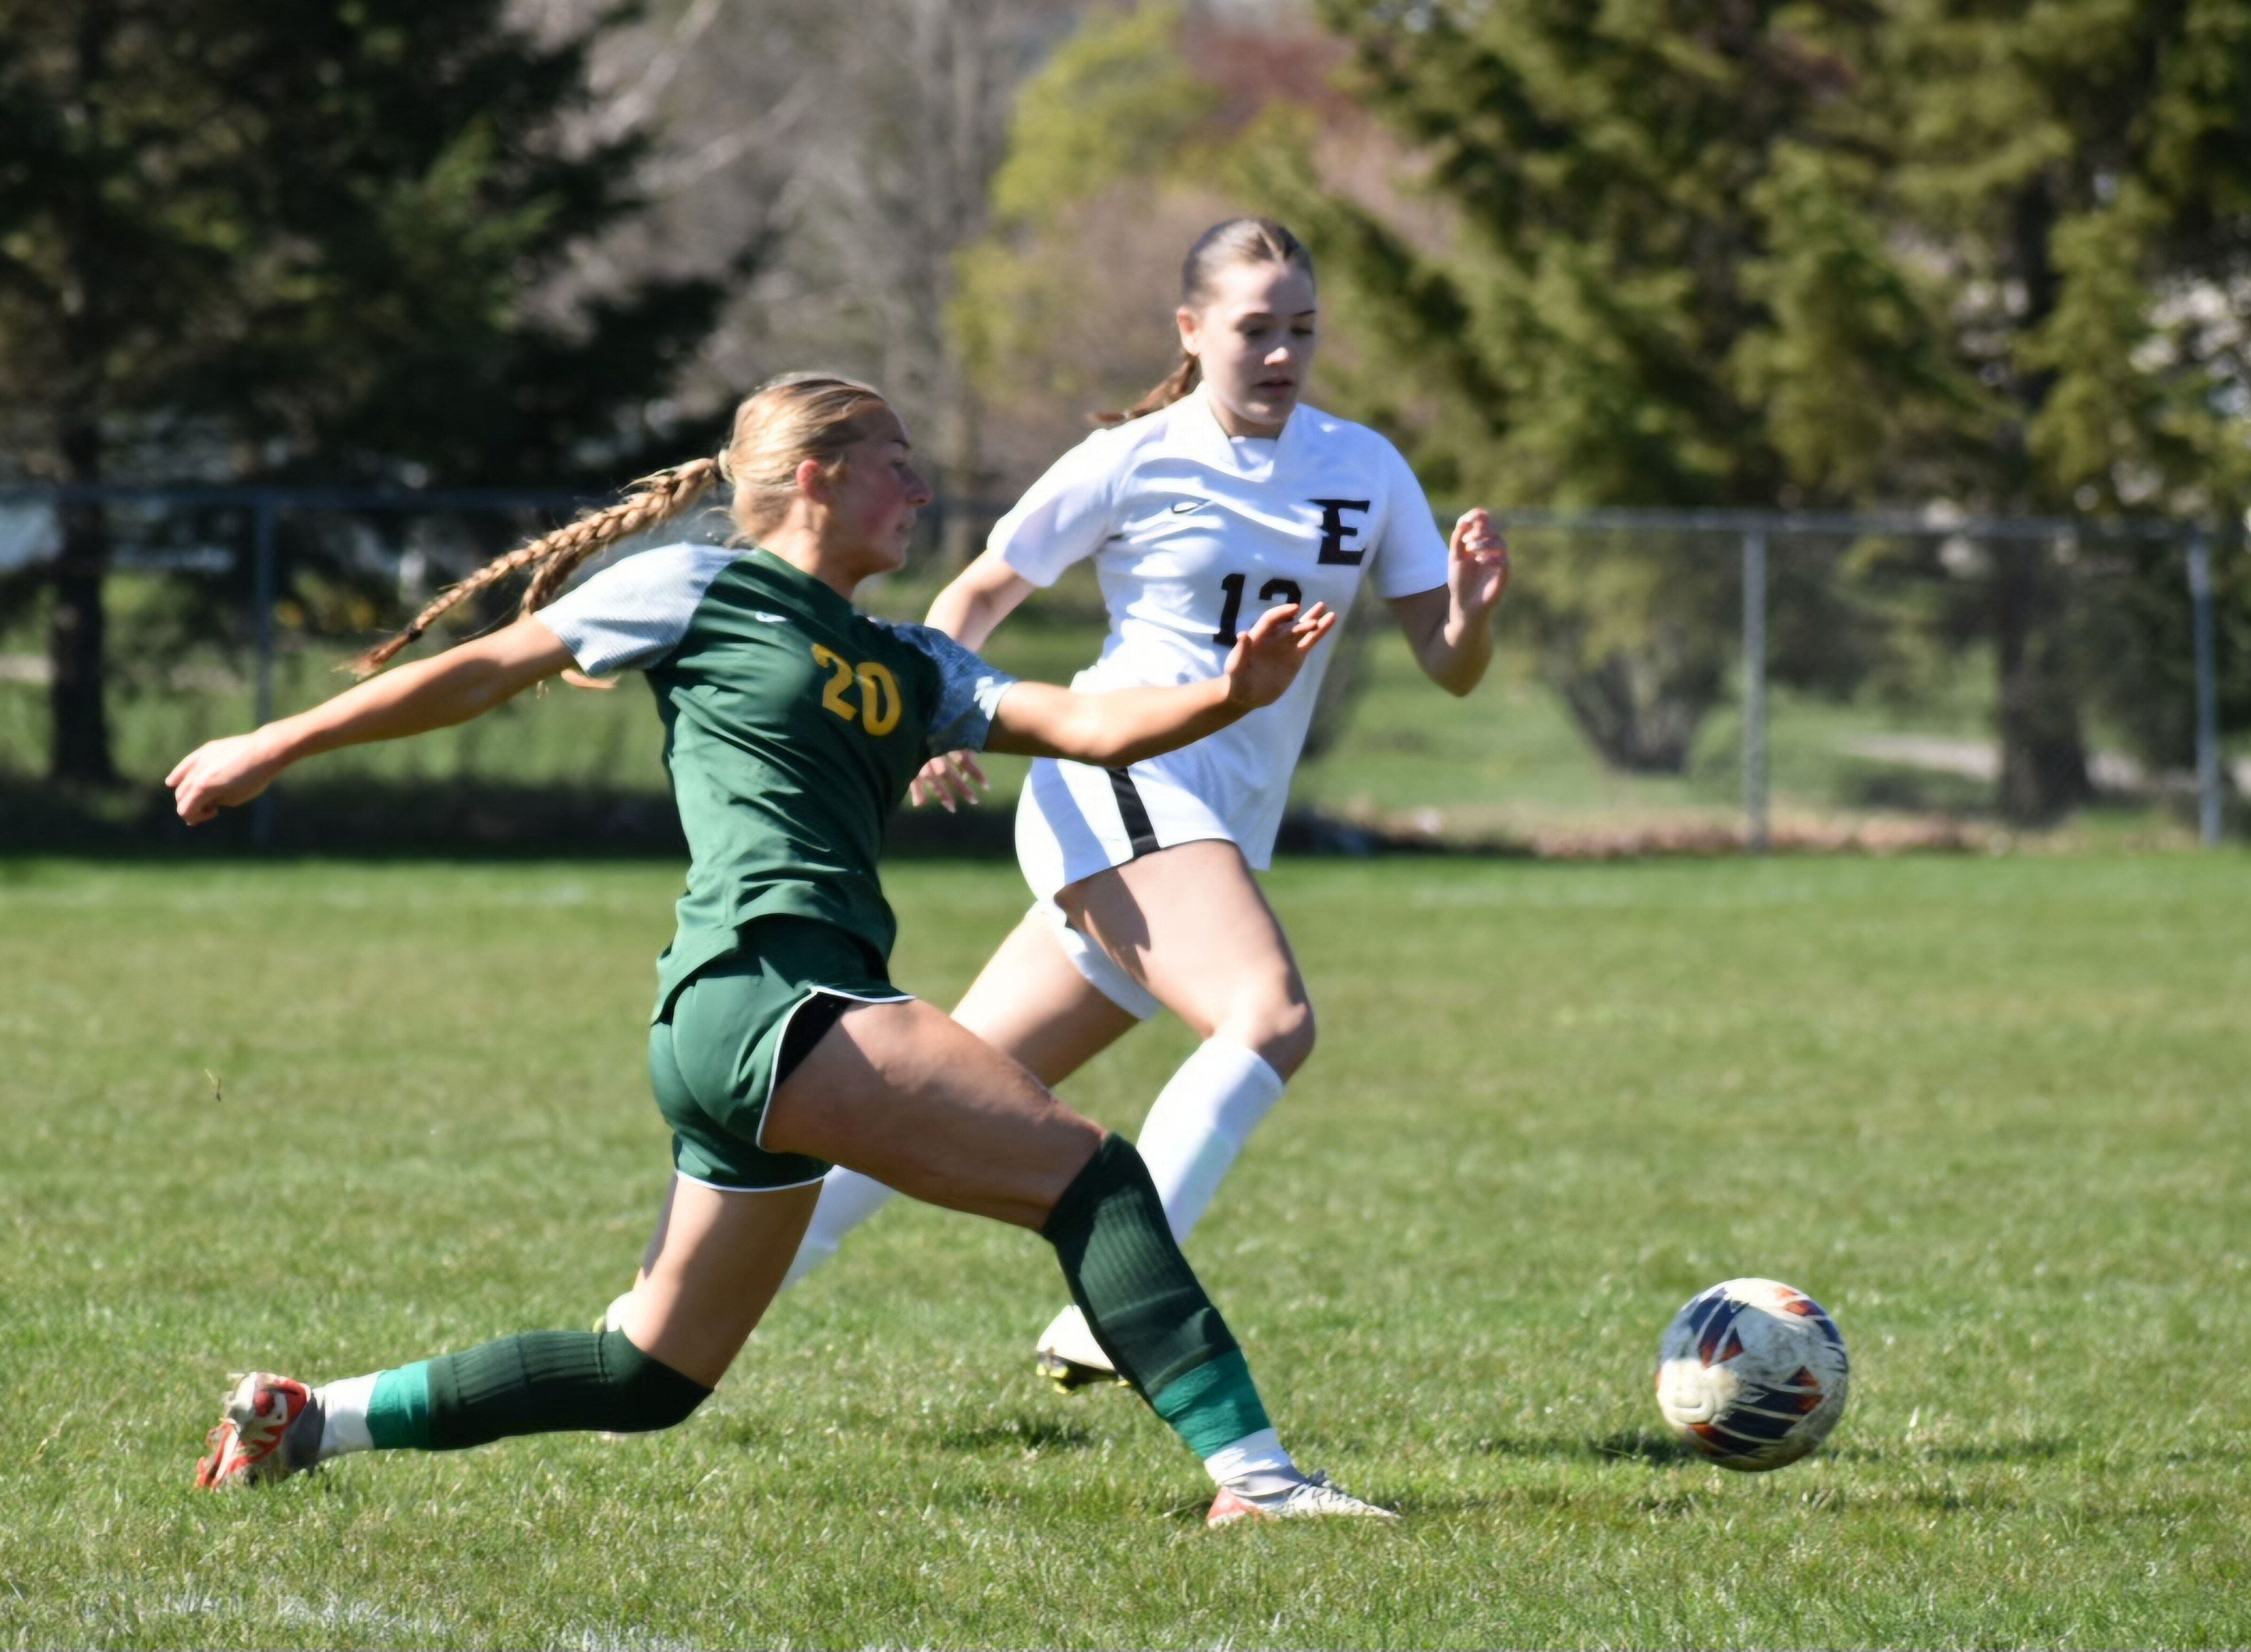 Crystal Lake South freshman Gracey LePage (20) tries to earn possession of the ball in a match this season. LePage has found success both on the pitch and the track for the Gators this season. Photo courtesy Tracey Bestmann